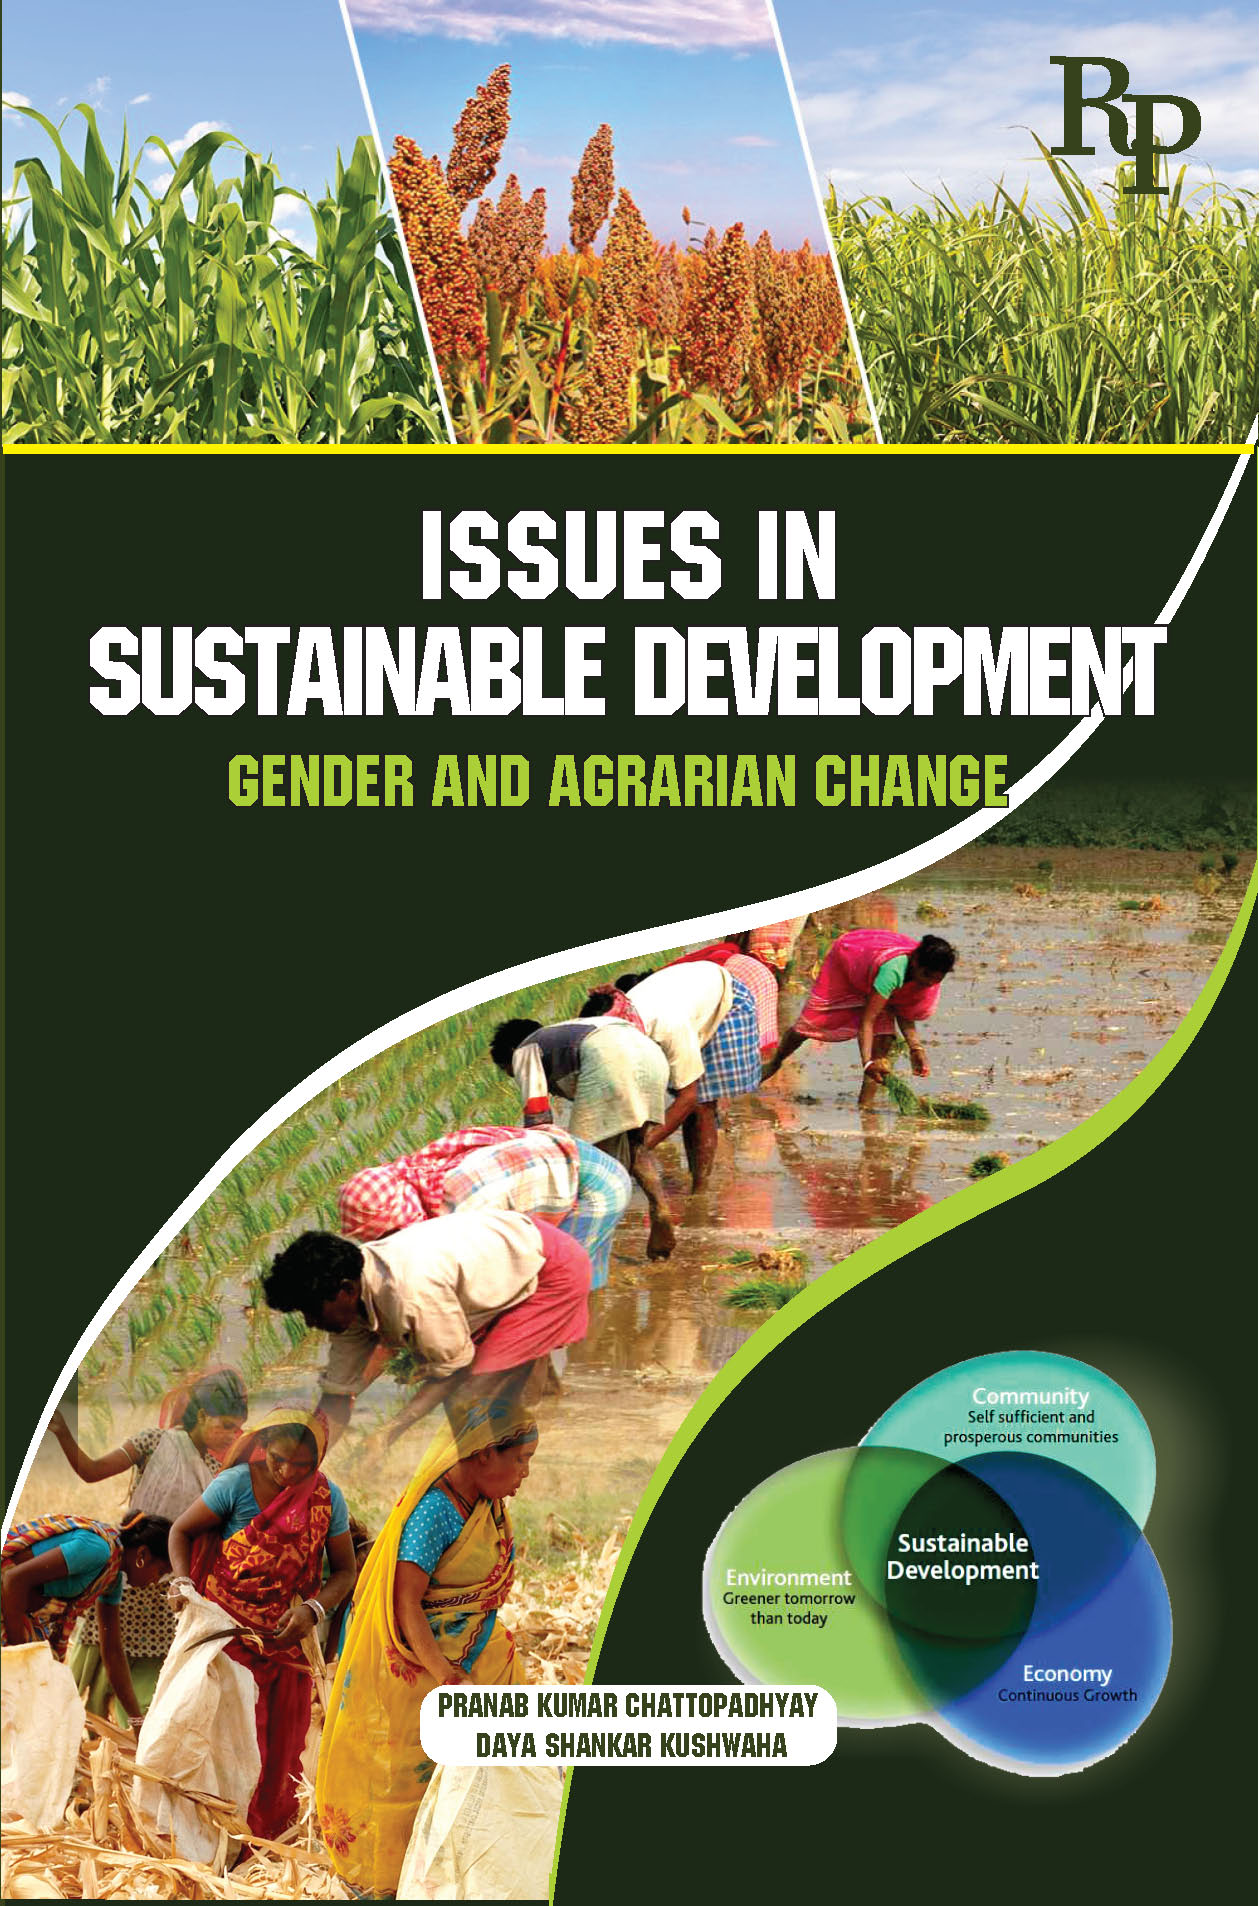 Issues in sustainable development- Gender and agrigarin.jpg